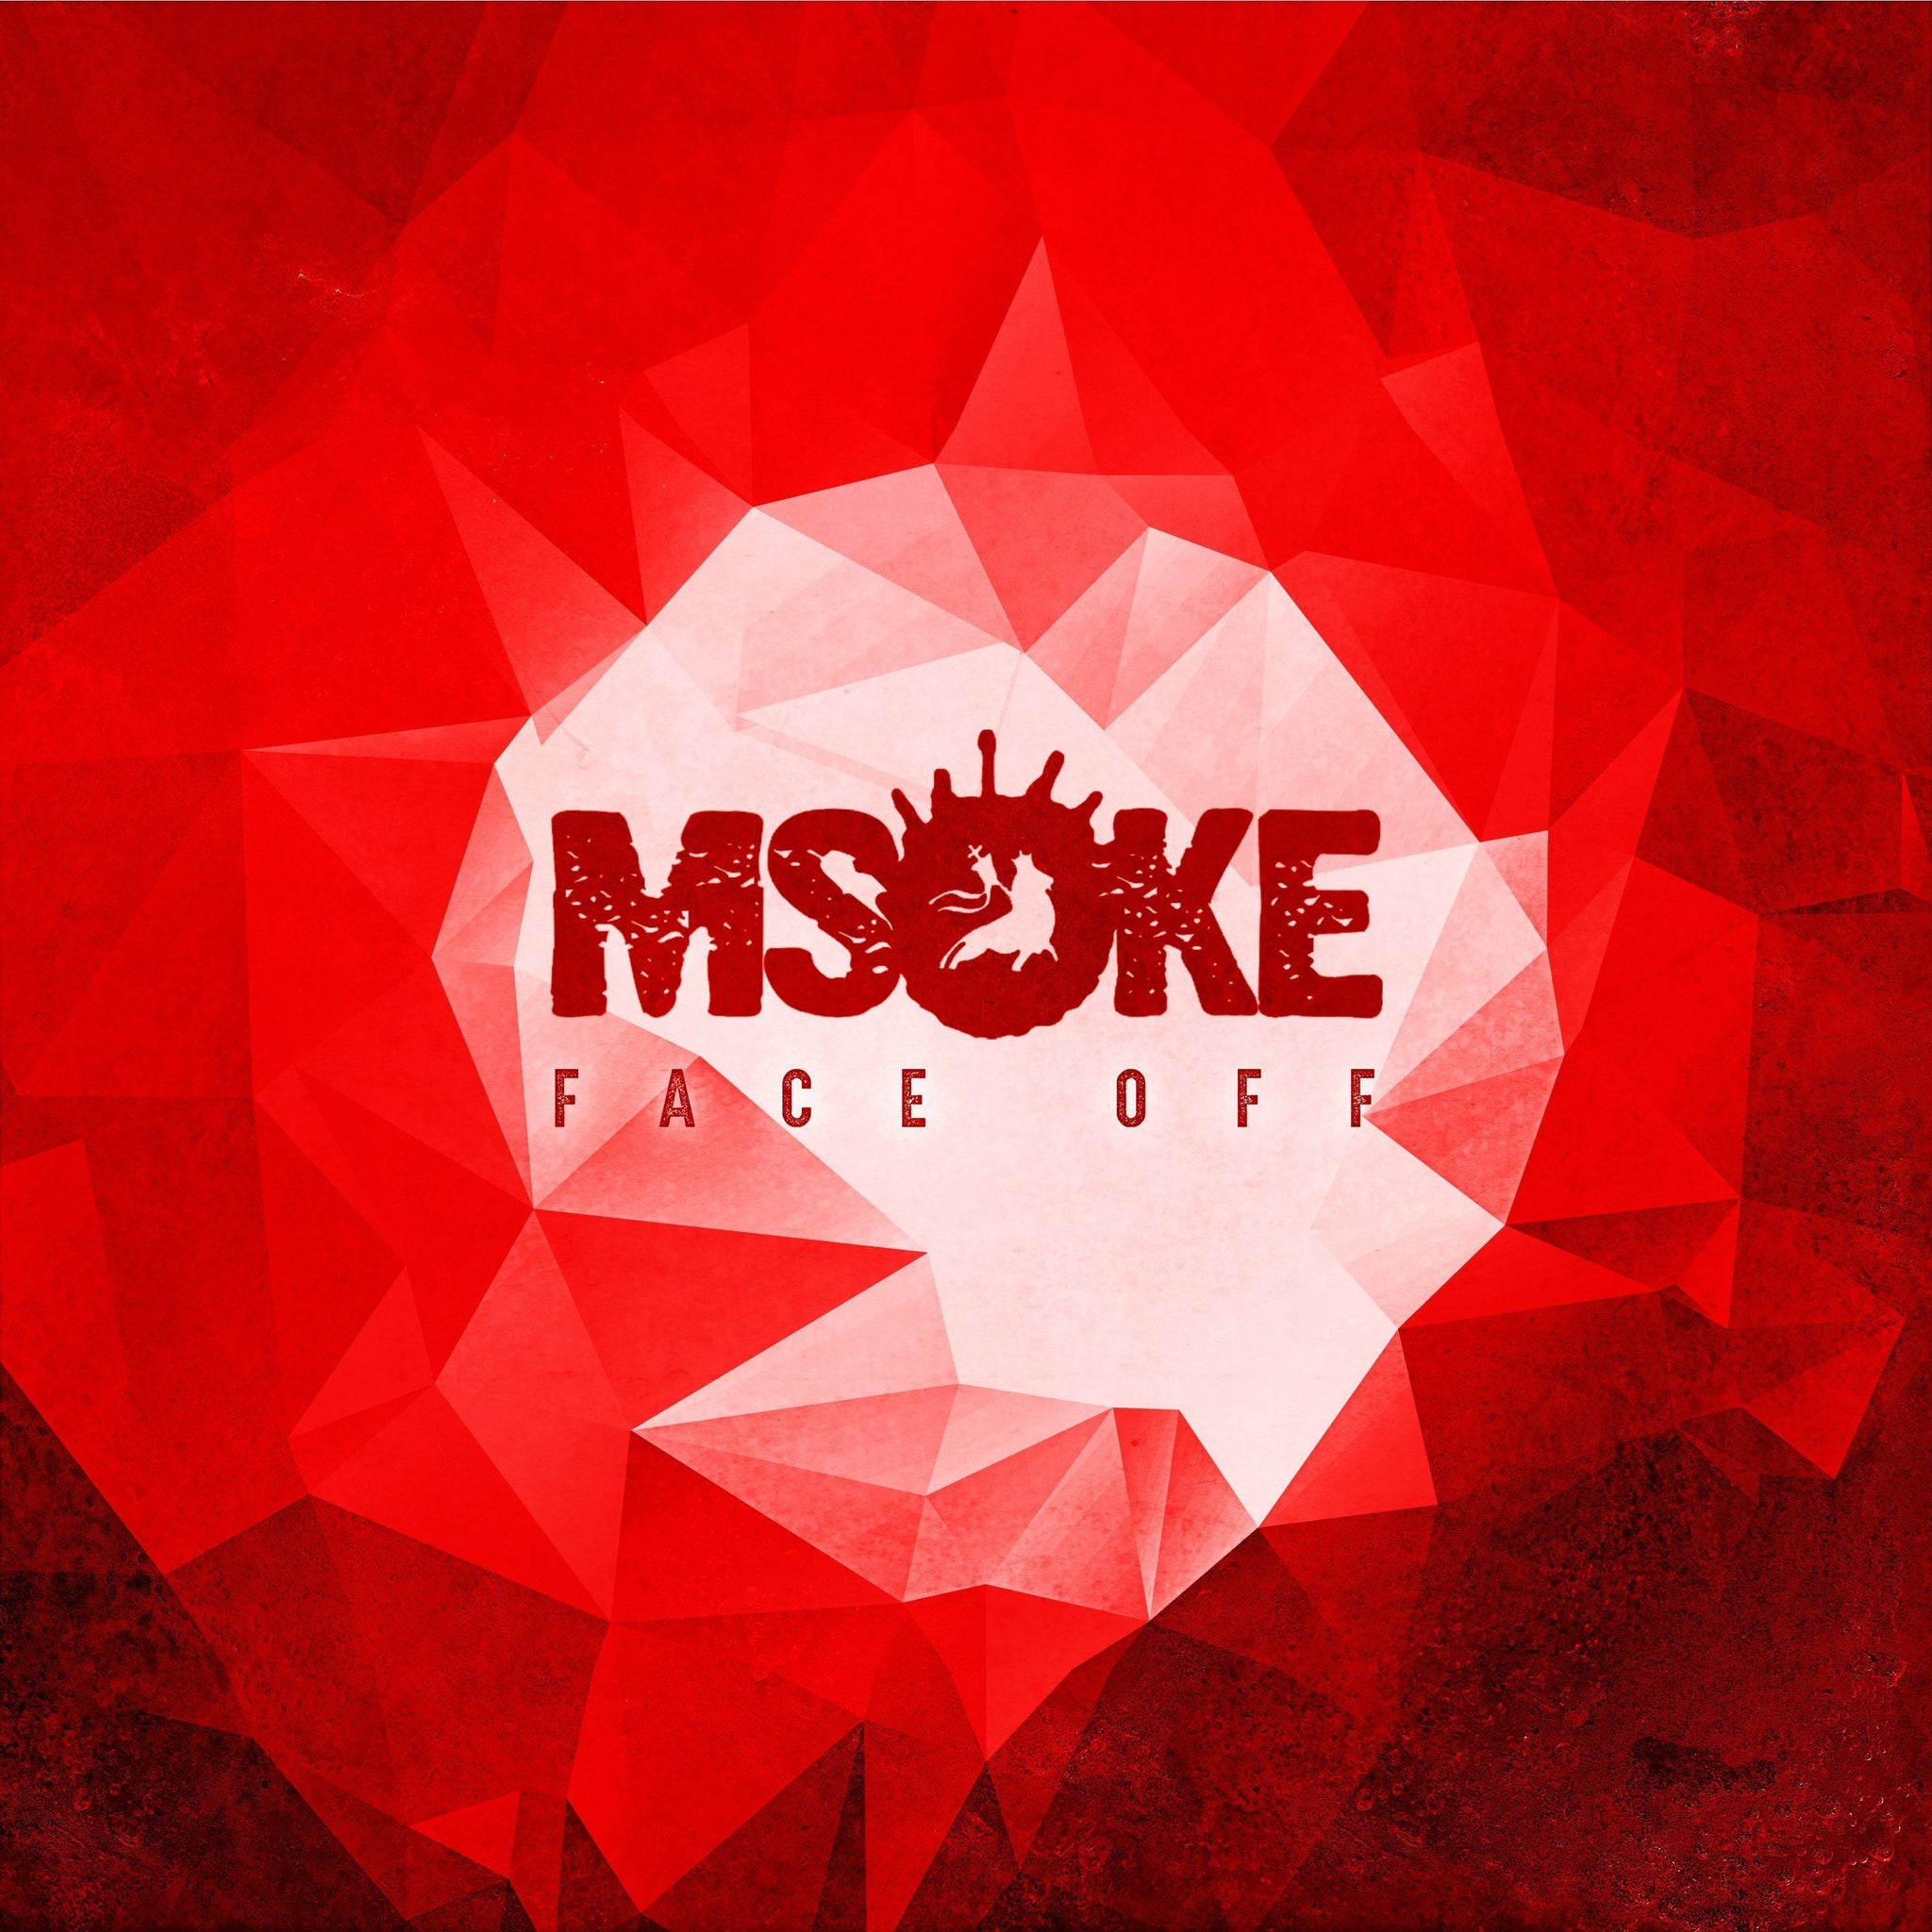 MSOKE - facettes cover single Face Off